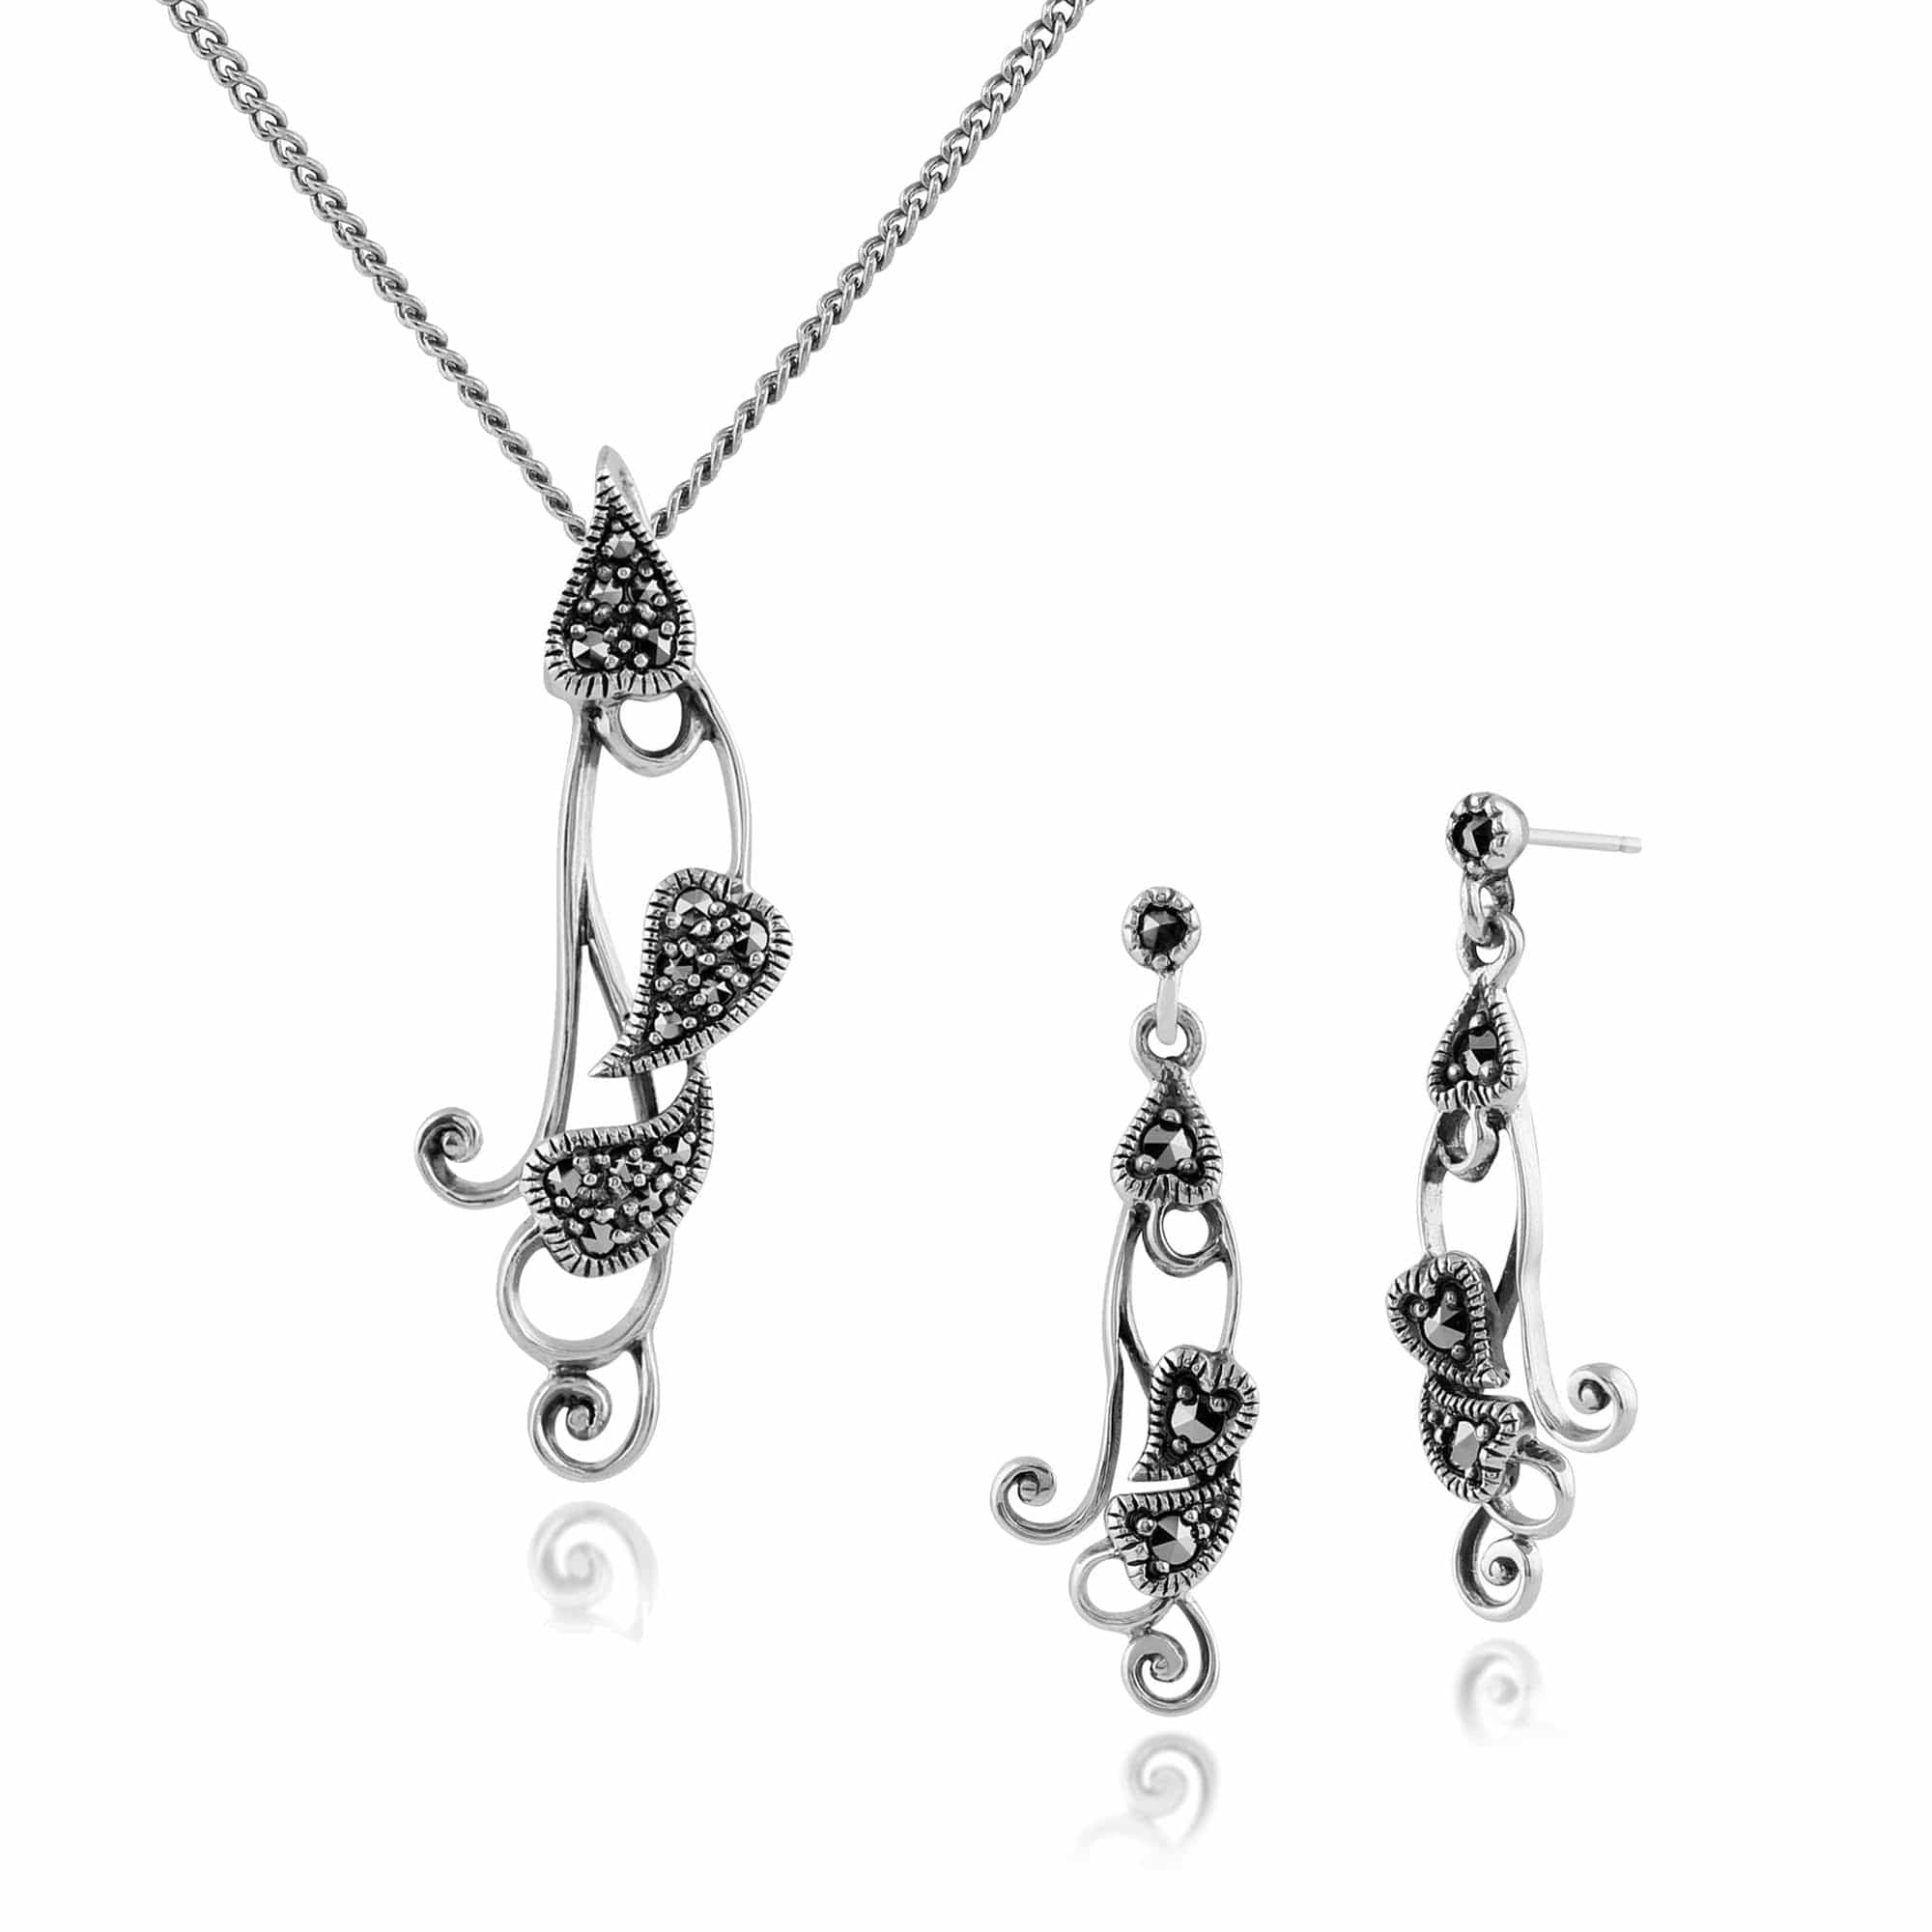 214E661201925-214P214901925 Art Nouveau Style Style Round Marcasite Twisted Leaf Drop Earrings & Pendant Set in 925 Sterling Silver 1